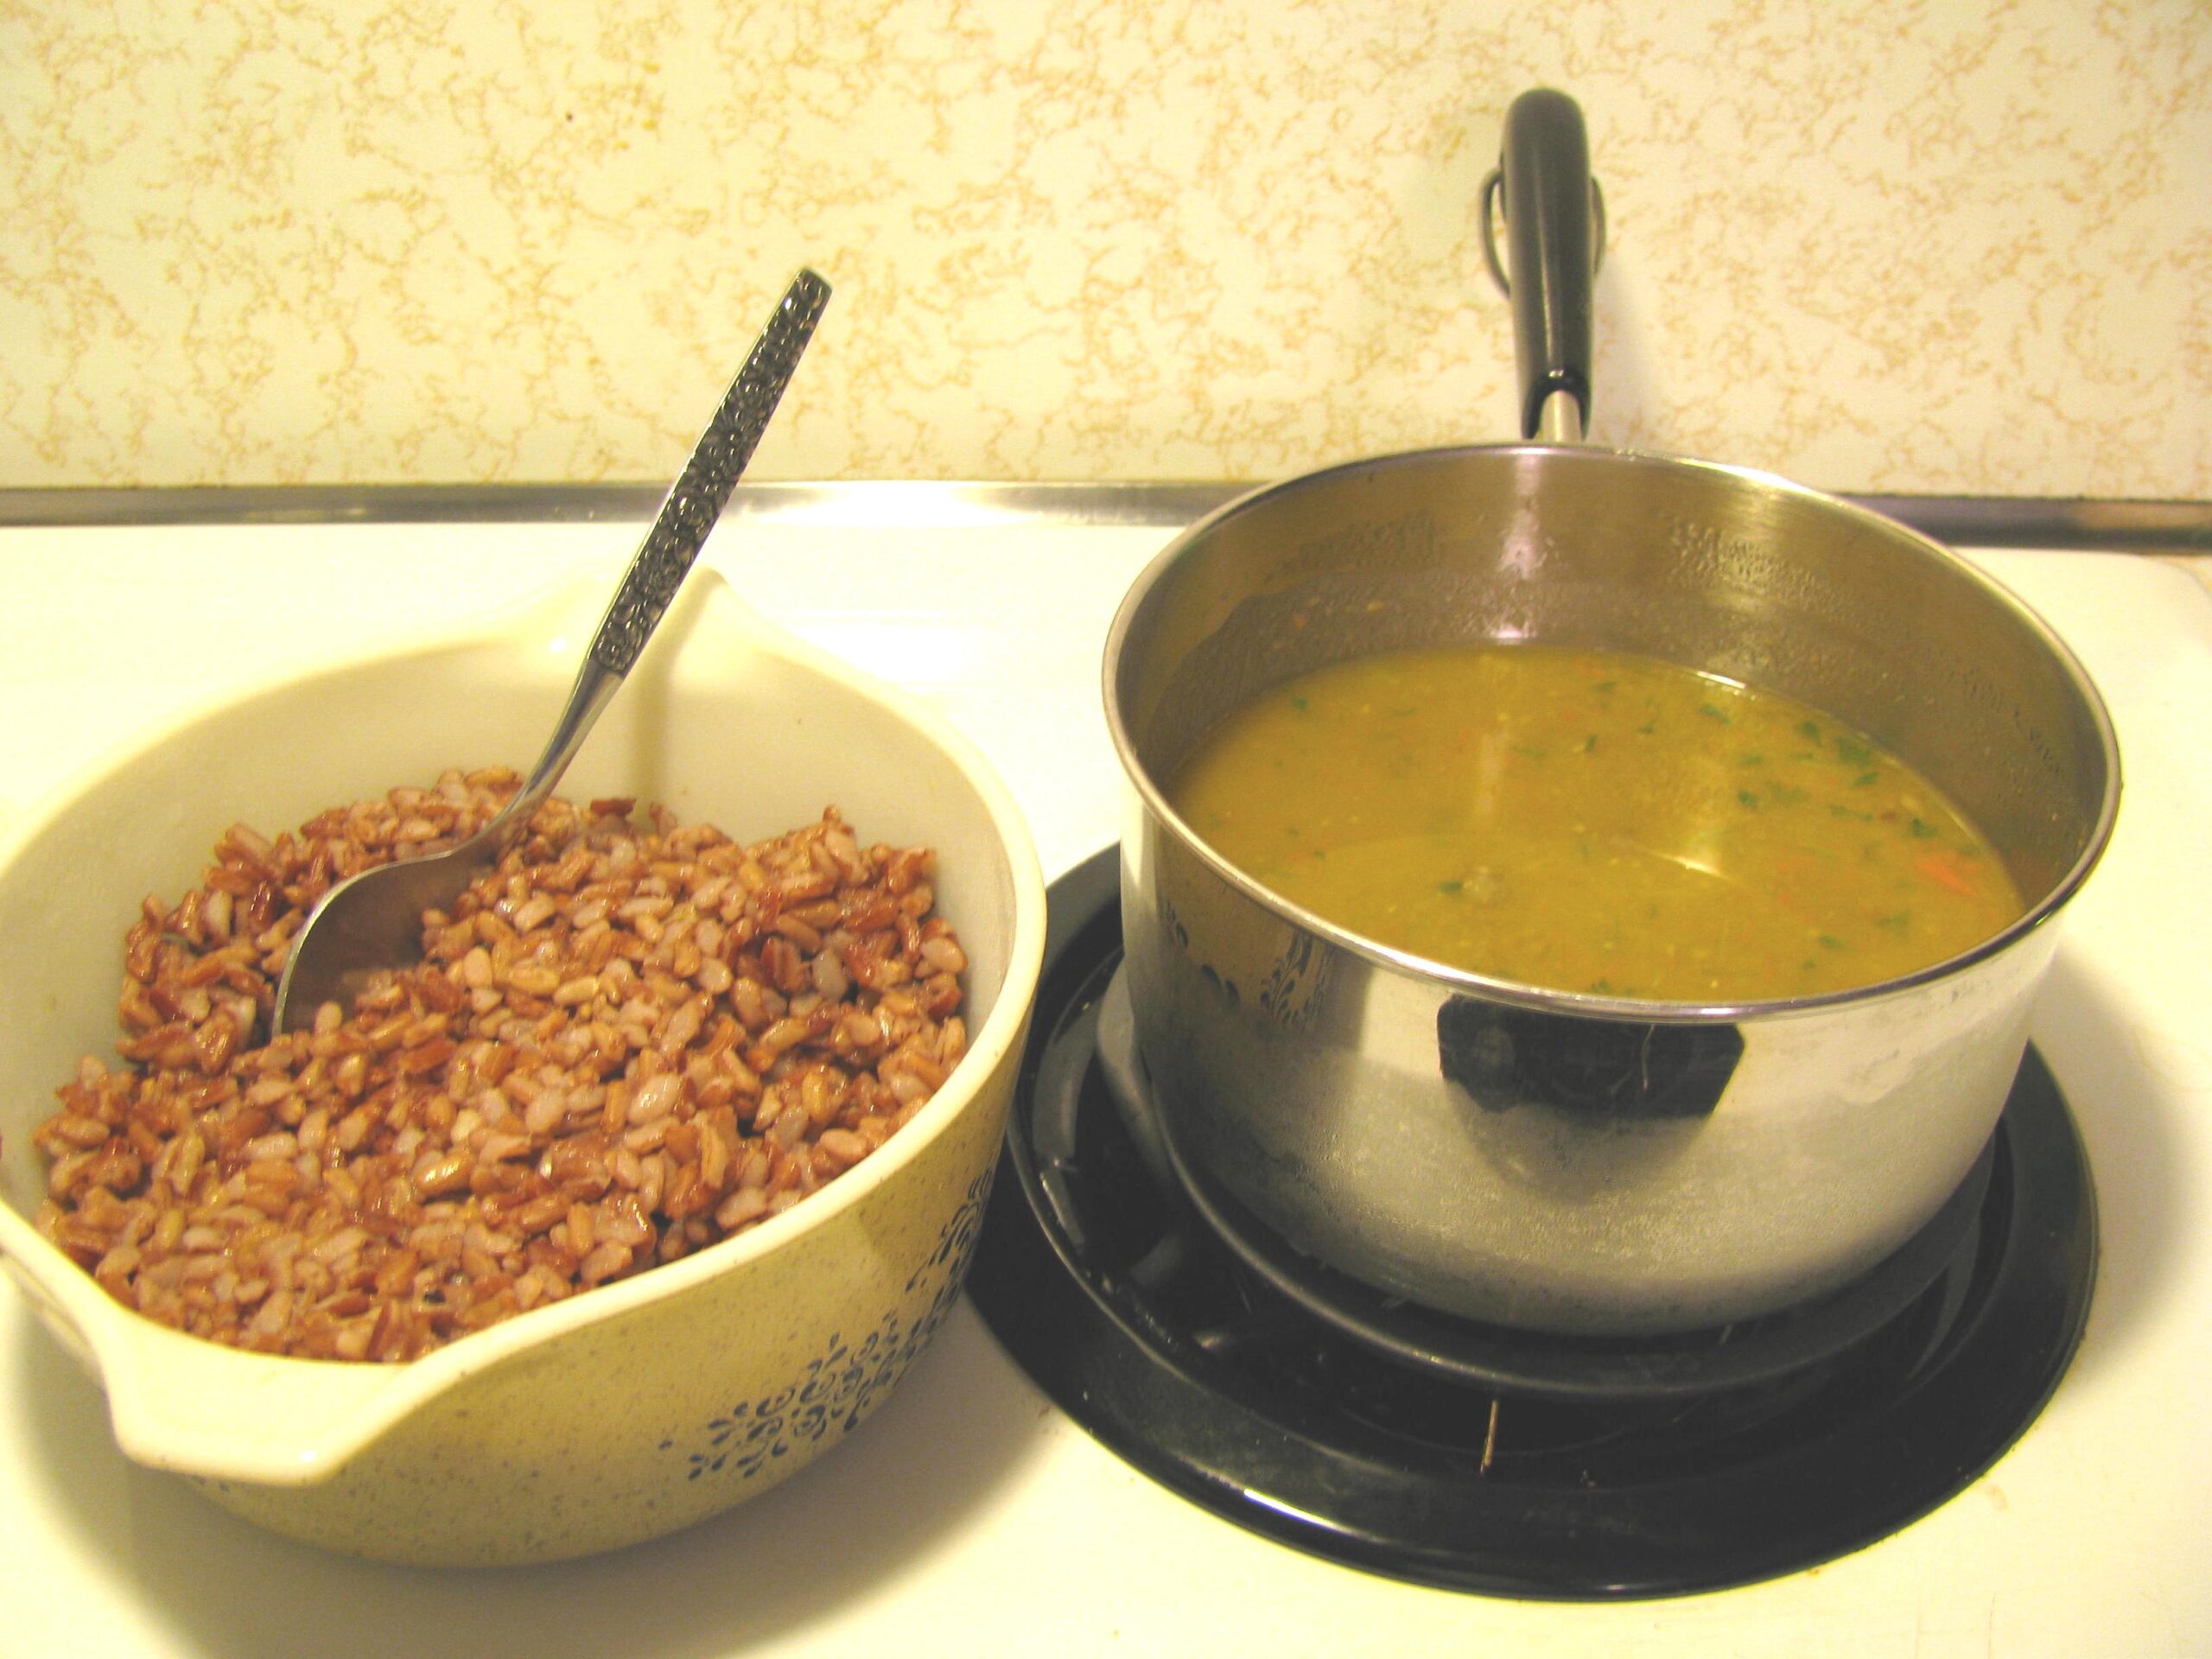 Delicious Lentil Soup Recipe – A Healthy Choice for Winter!